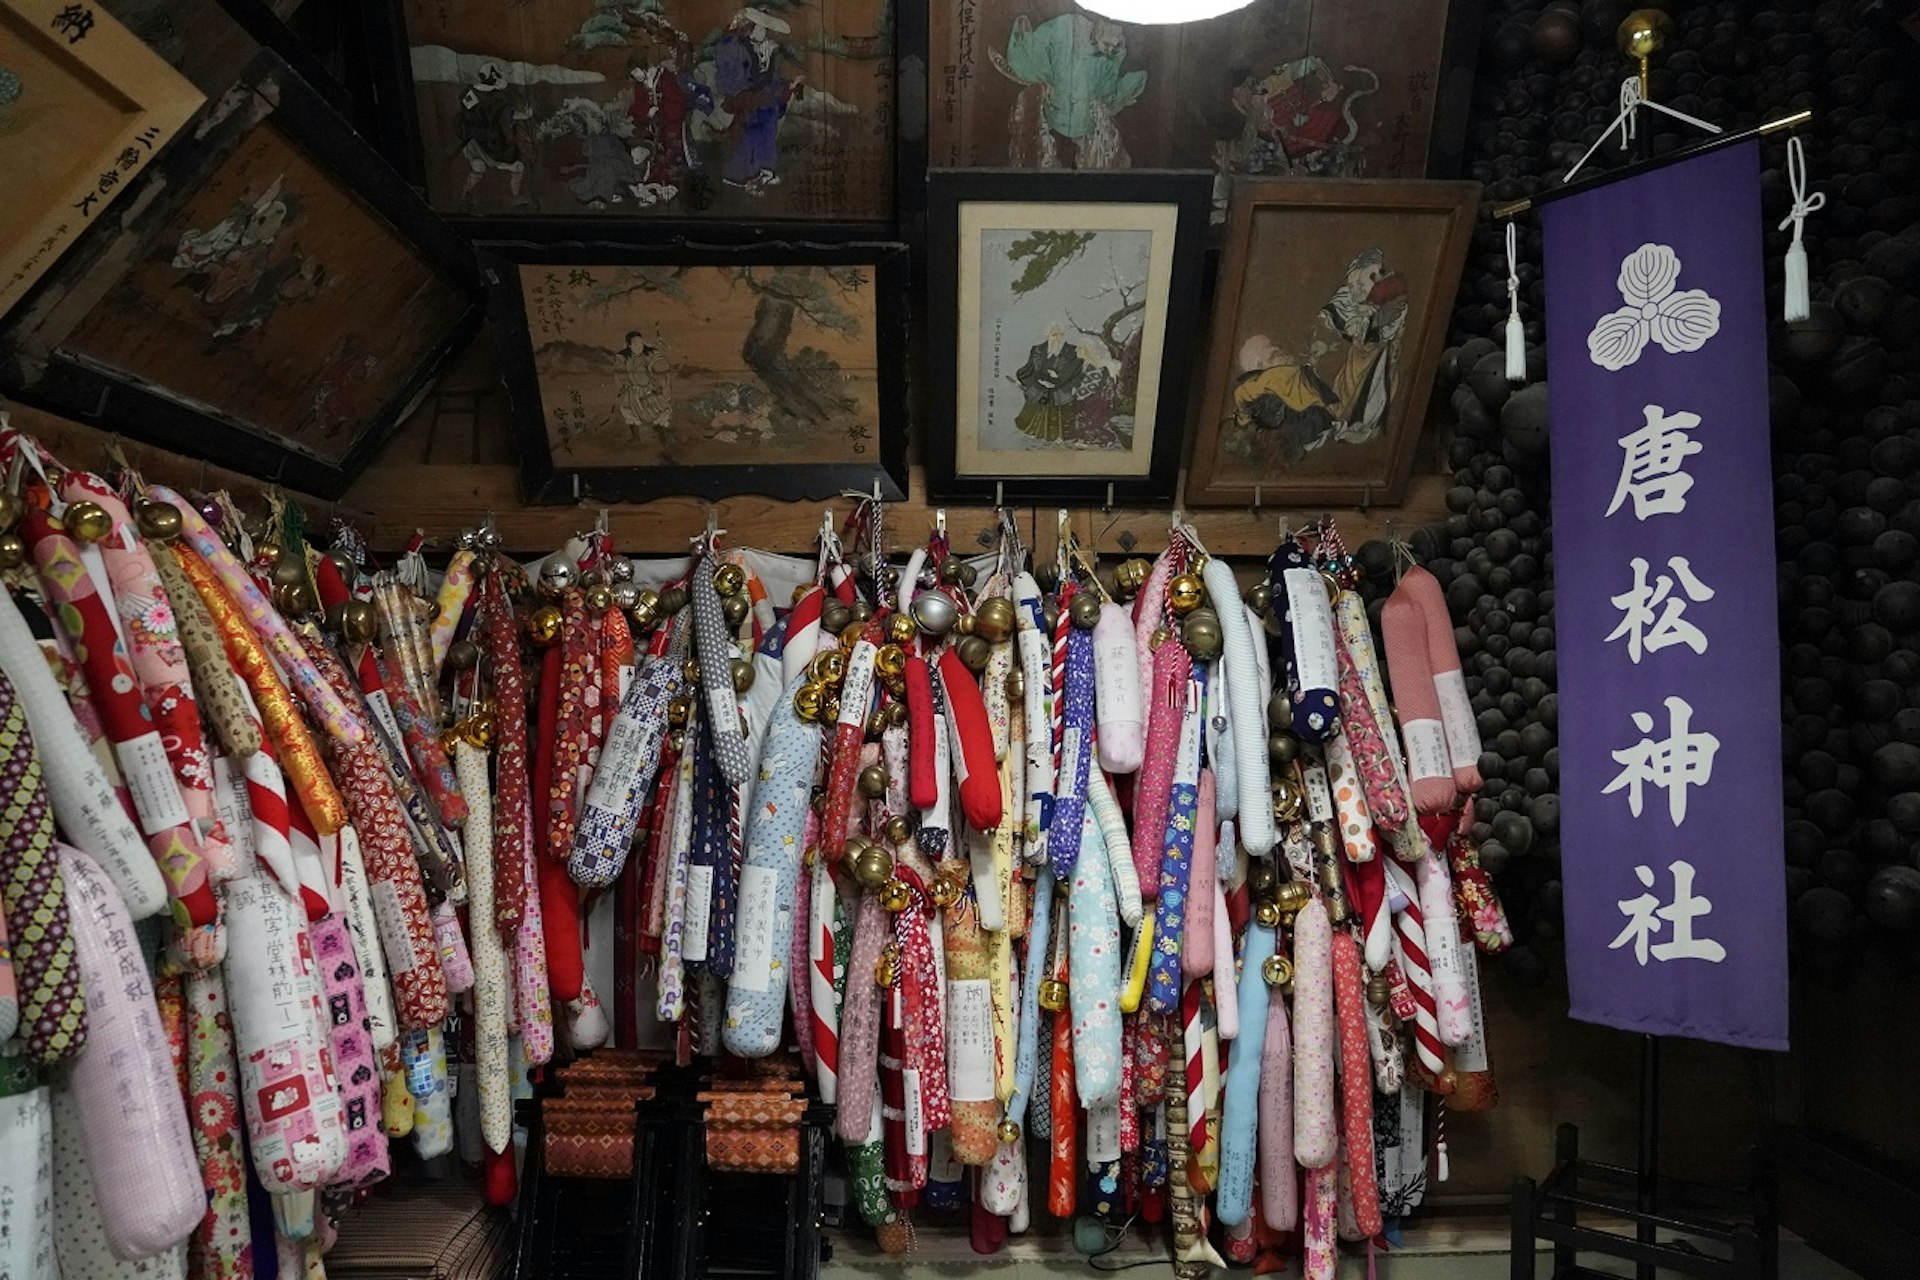 Colourful ropes and bells gathered inside the shrine